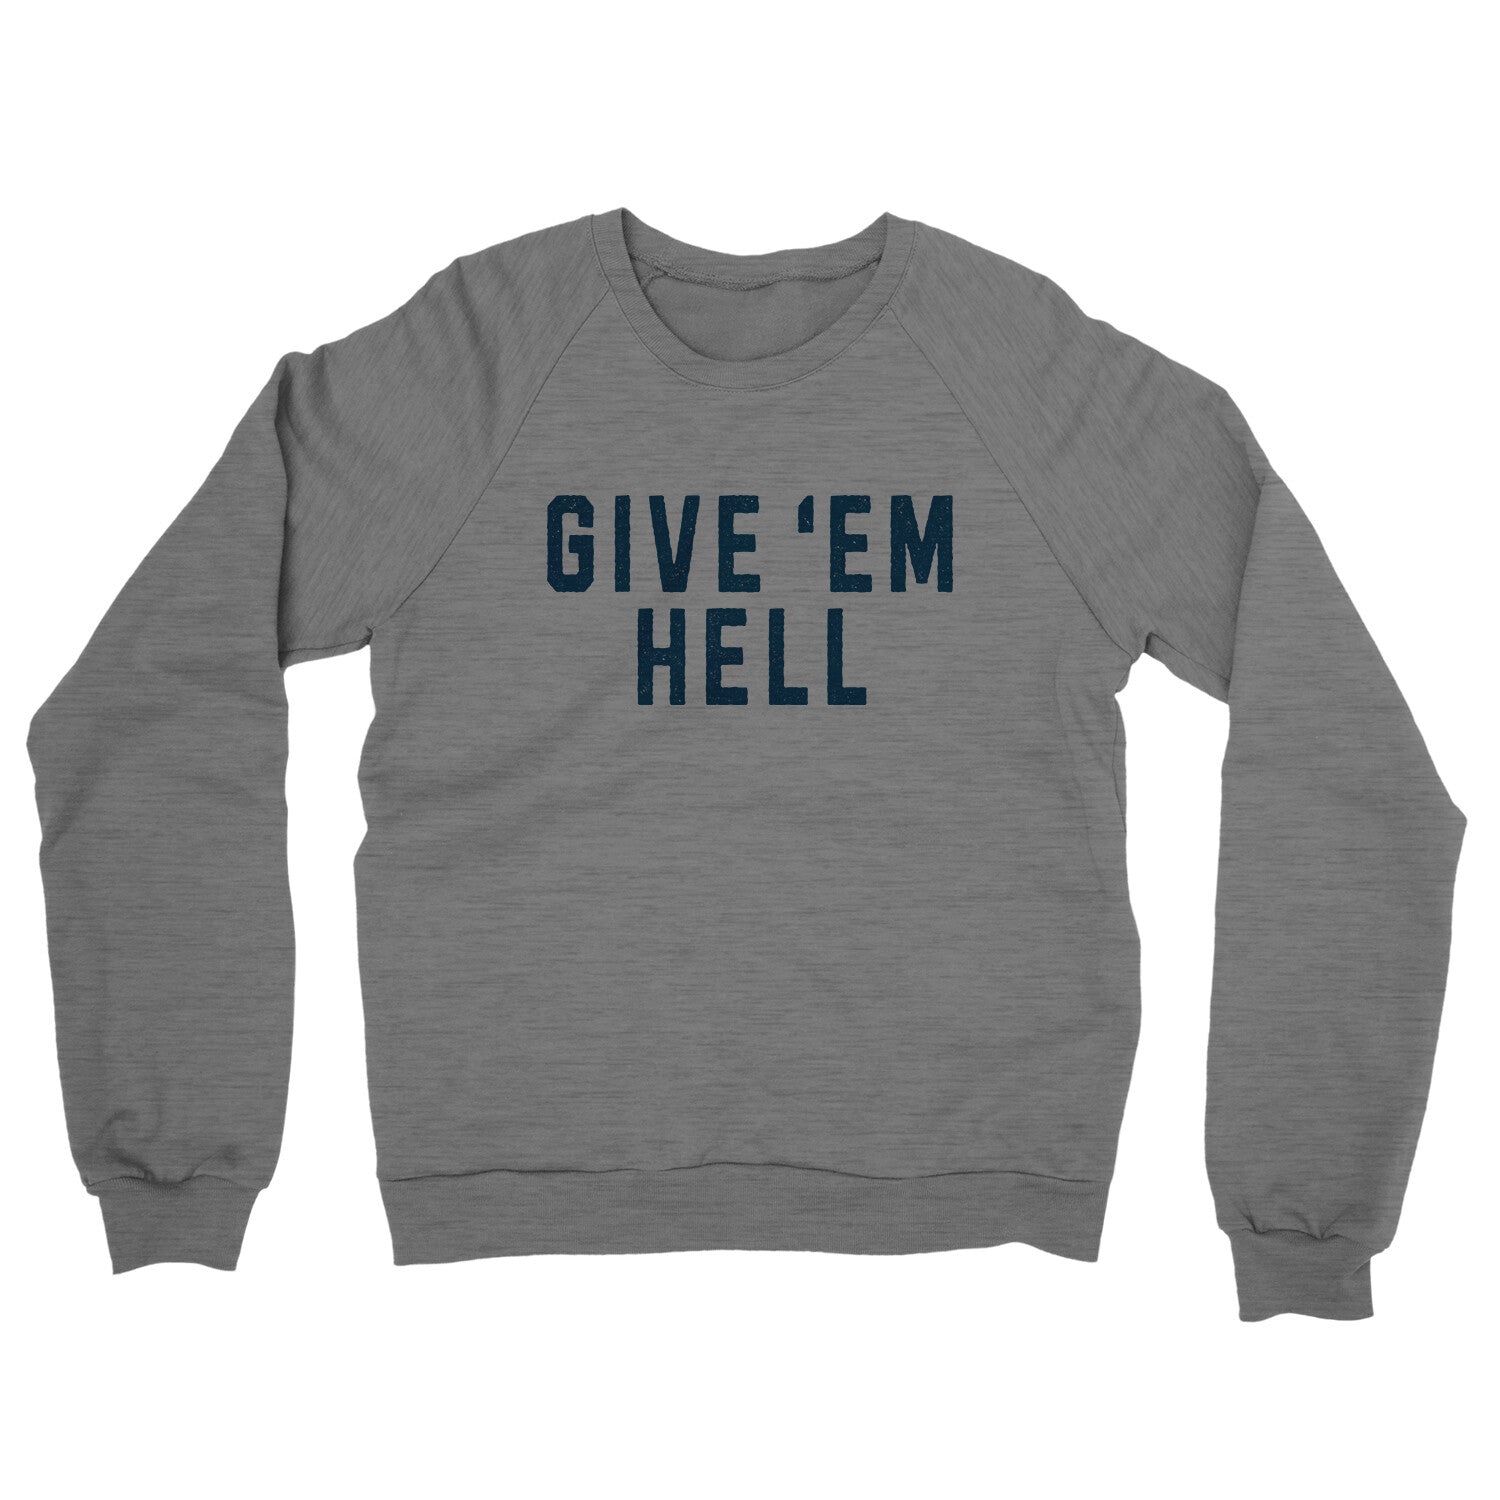 Give ‘em Hell in Graphite Heather Color